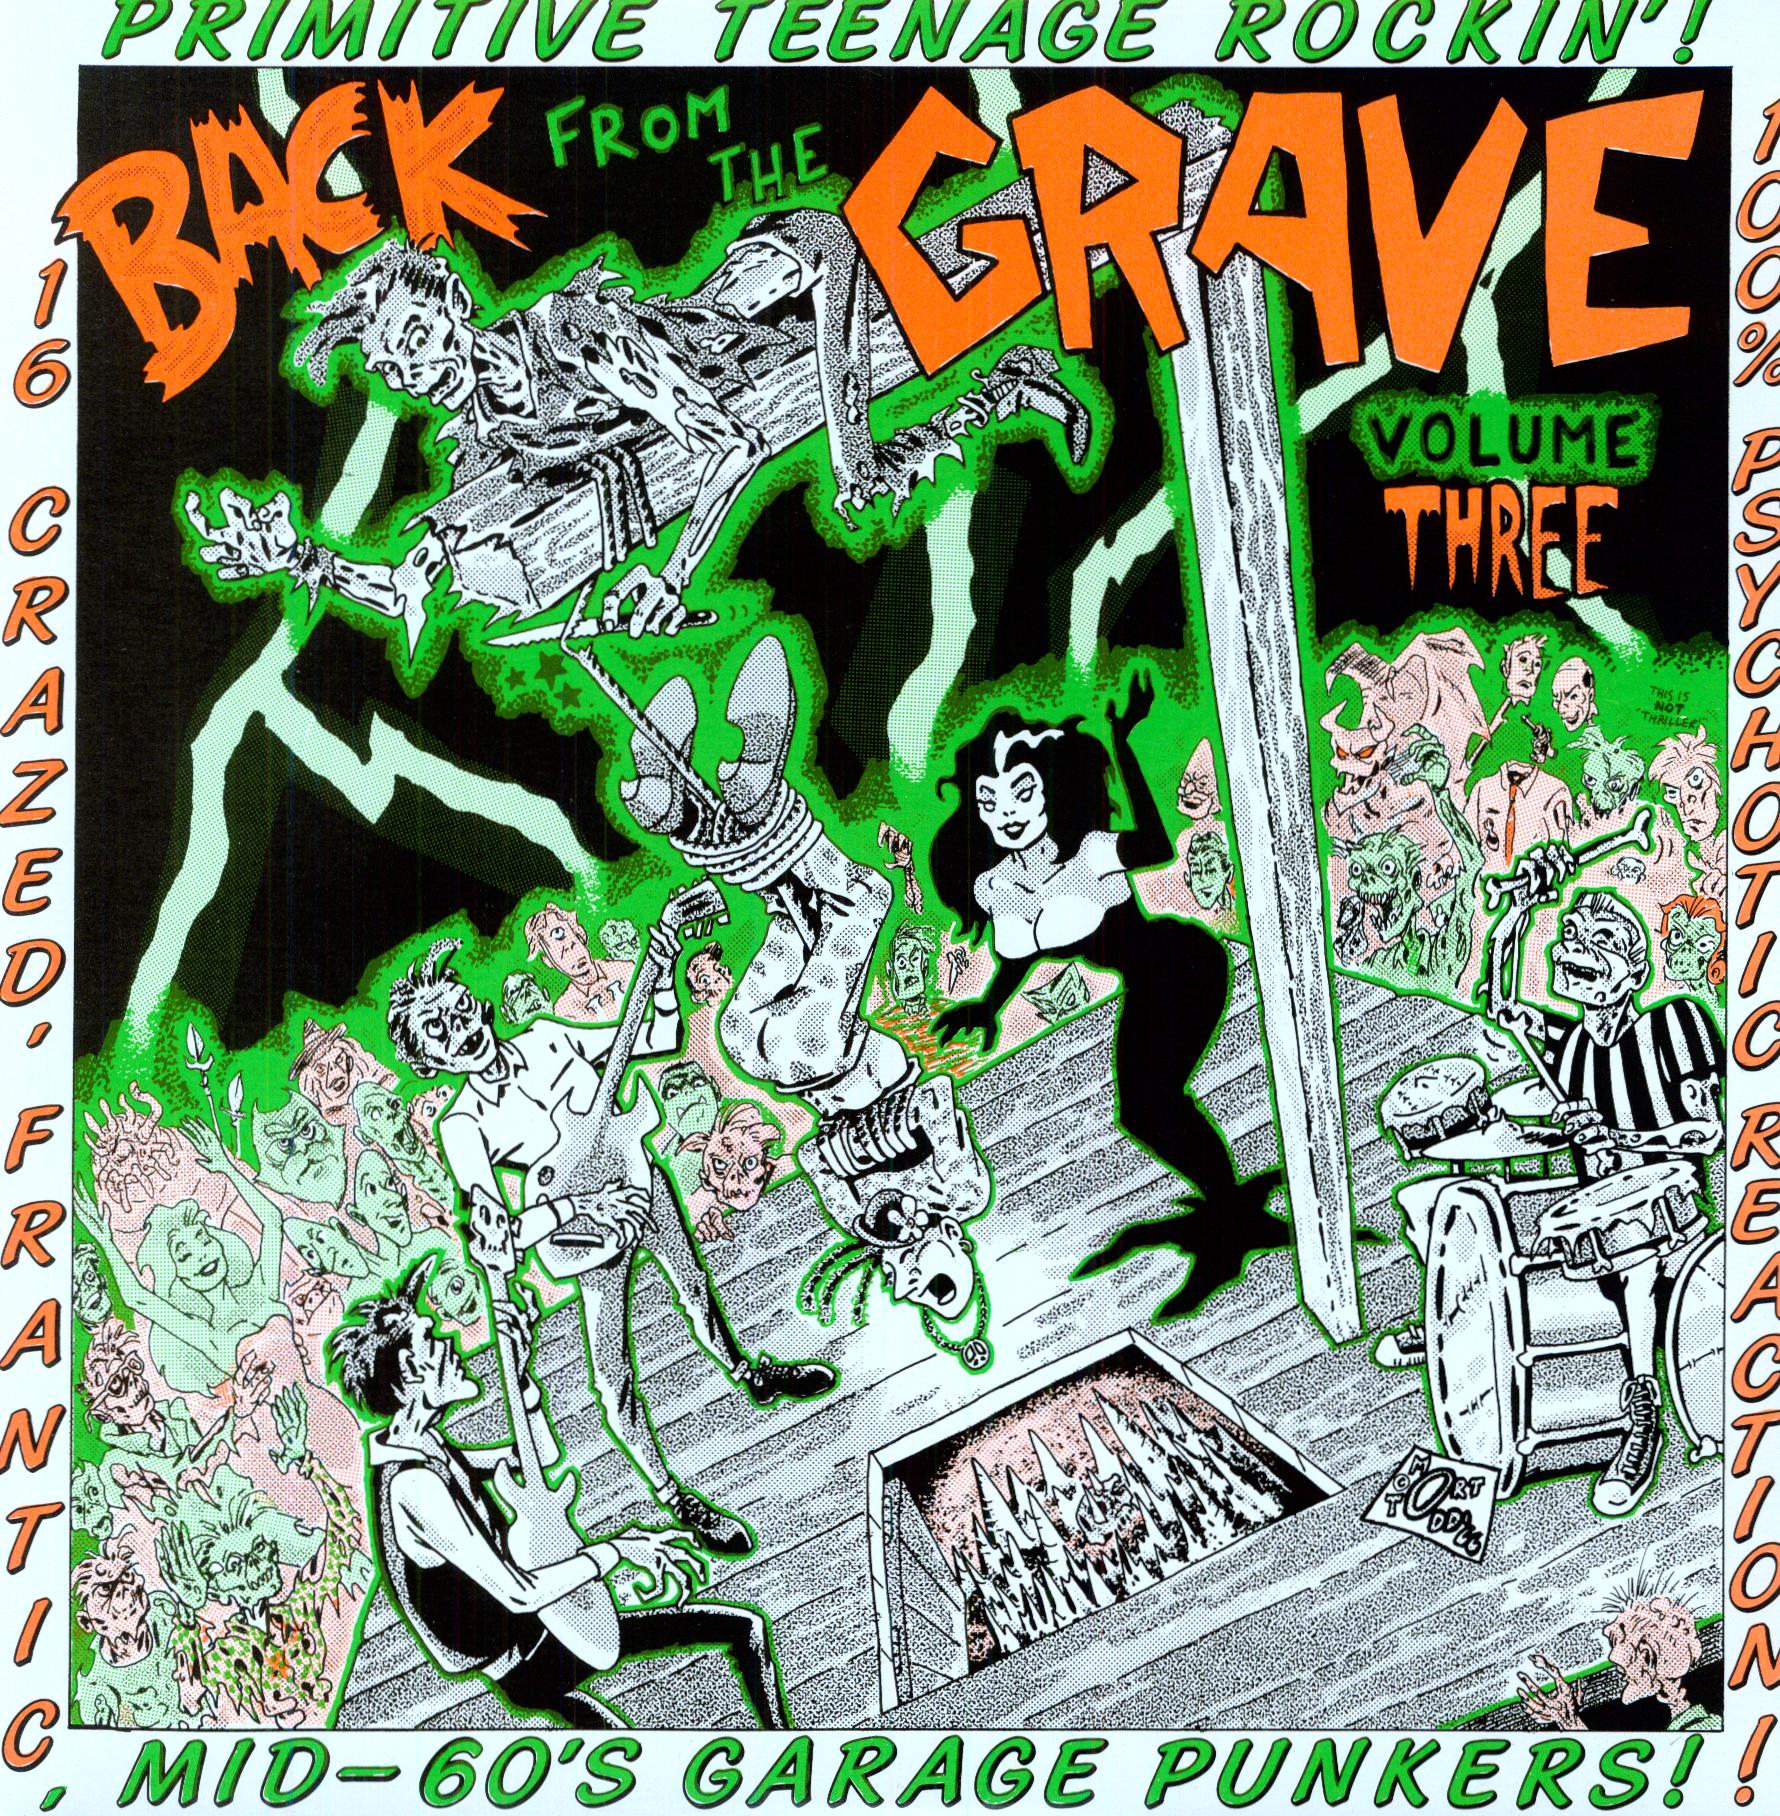 BACK FROM THE GRAVE 3 / VARIOUS